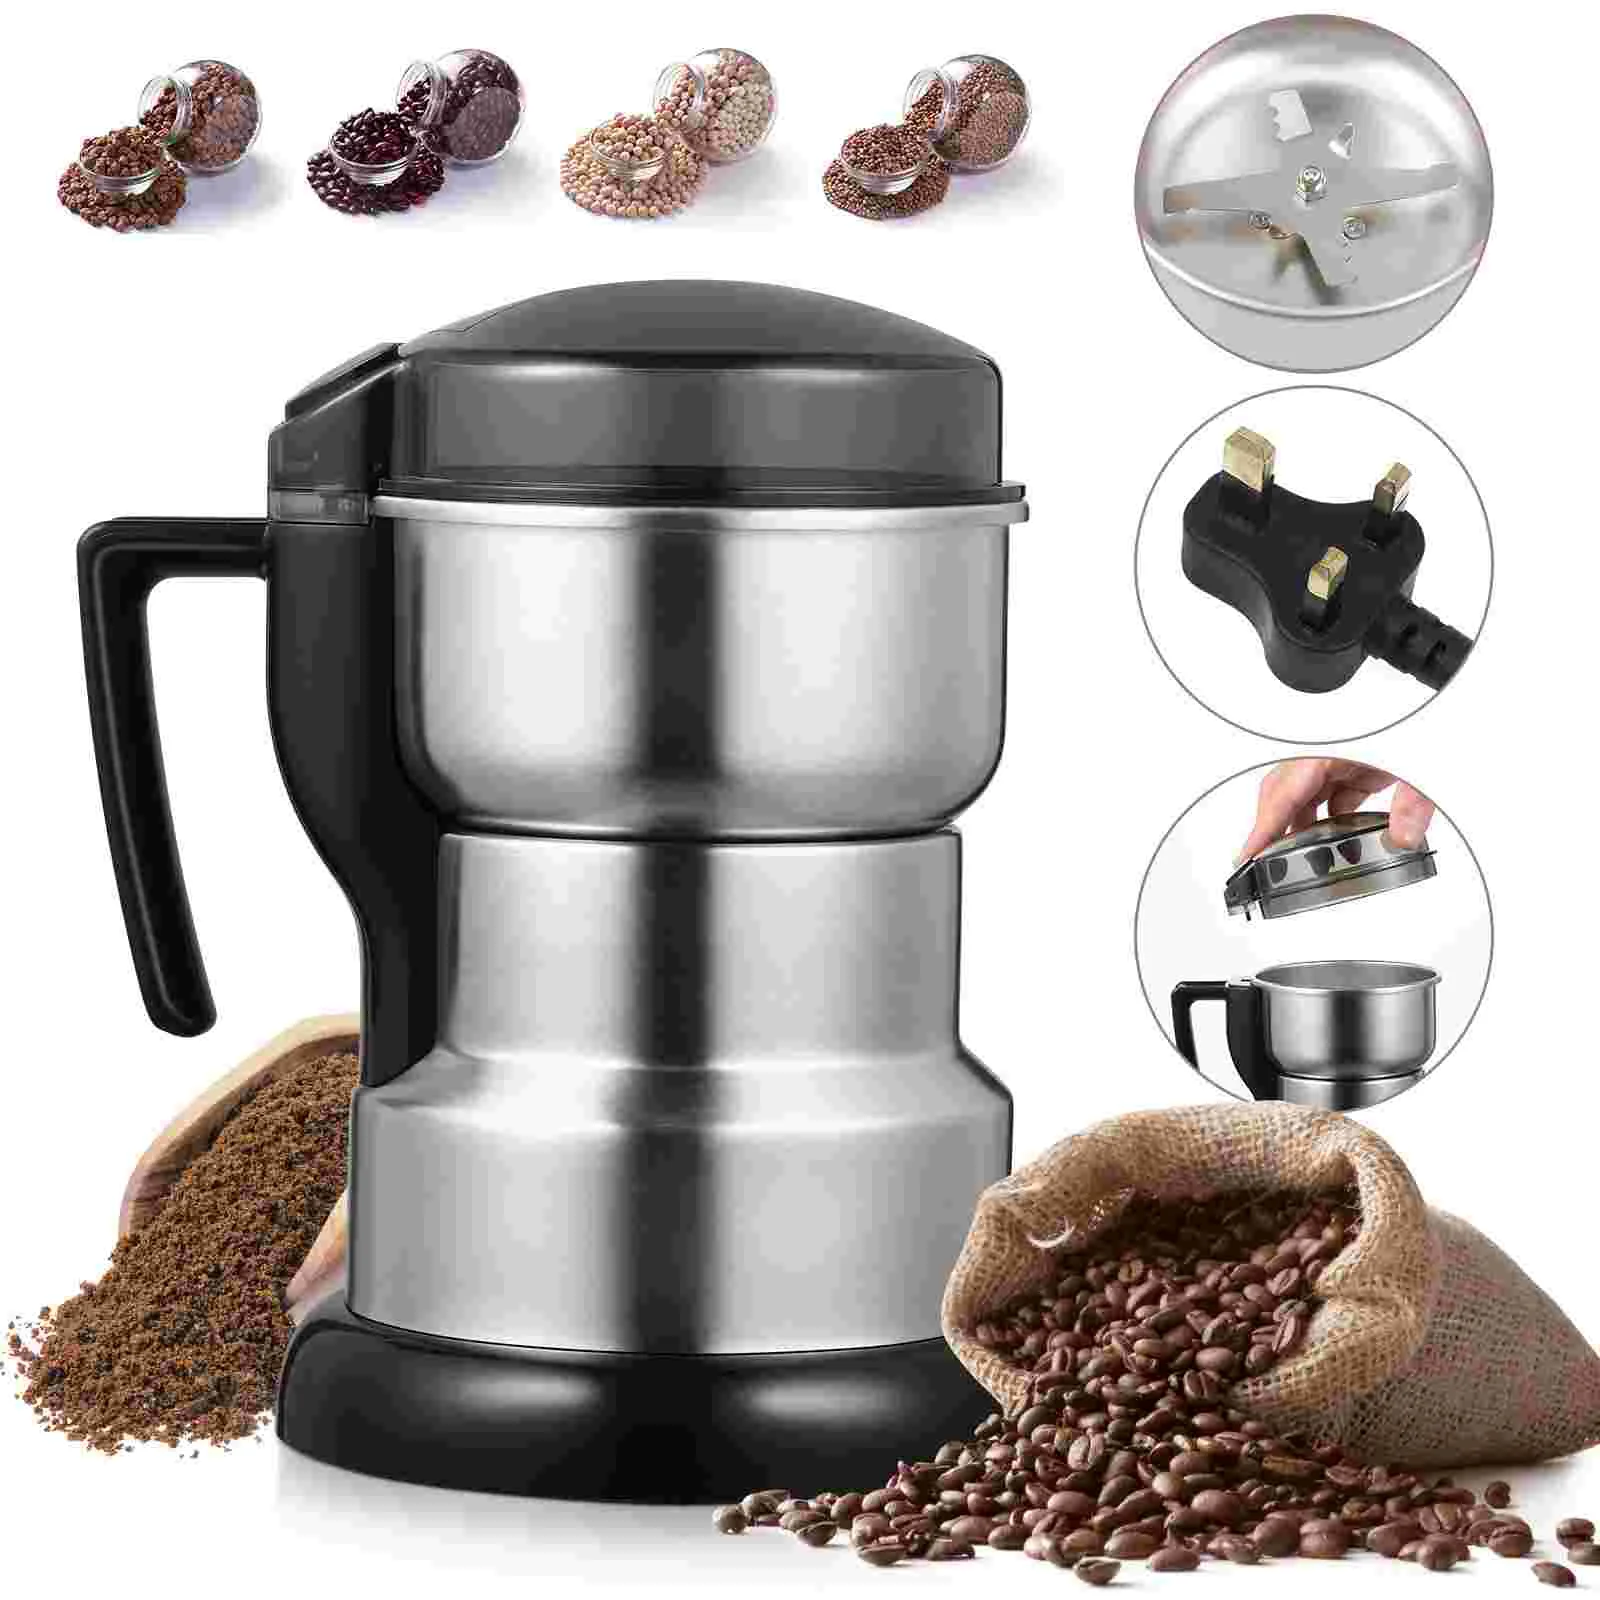 

Grinder Electric Grinding Machine Coffee Bean Maker Espresso Machines Home Stainless Steel Beans Kitchen Grinders